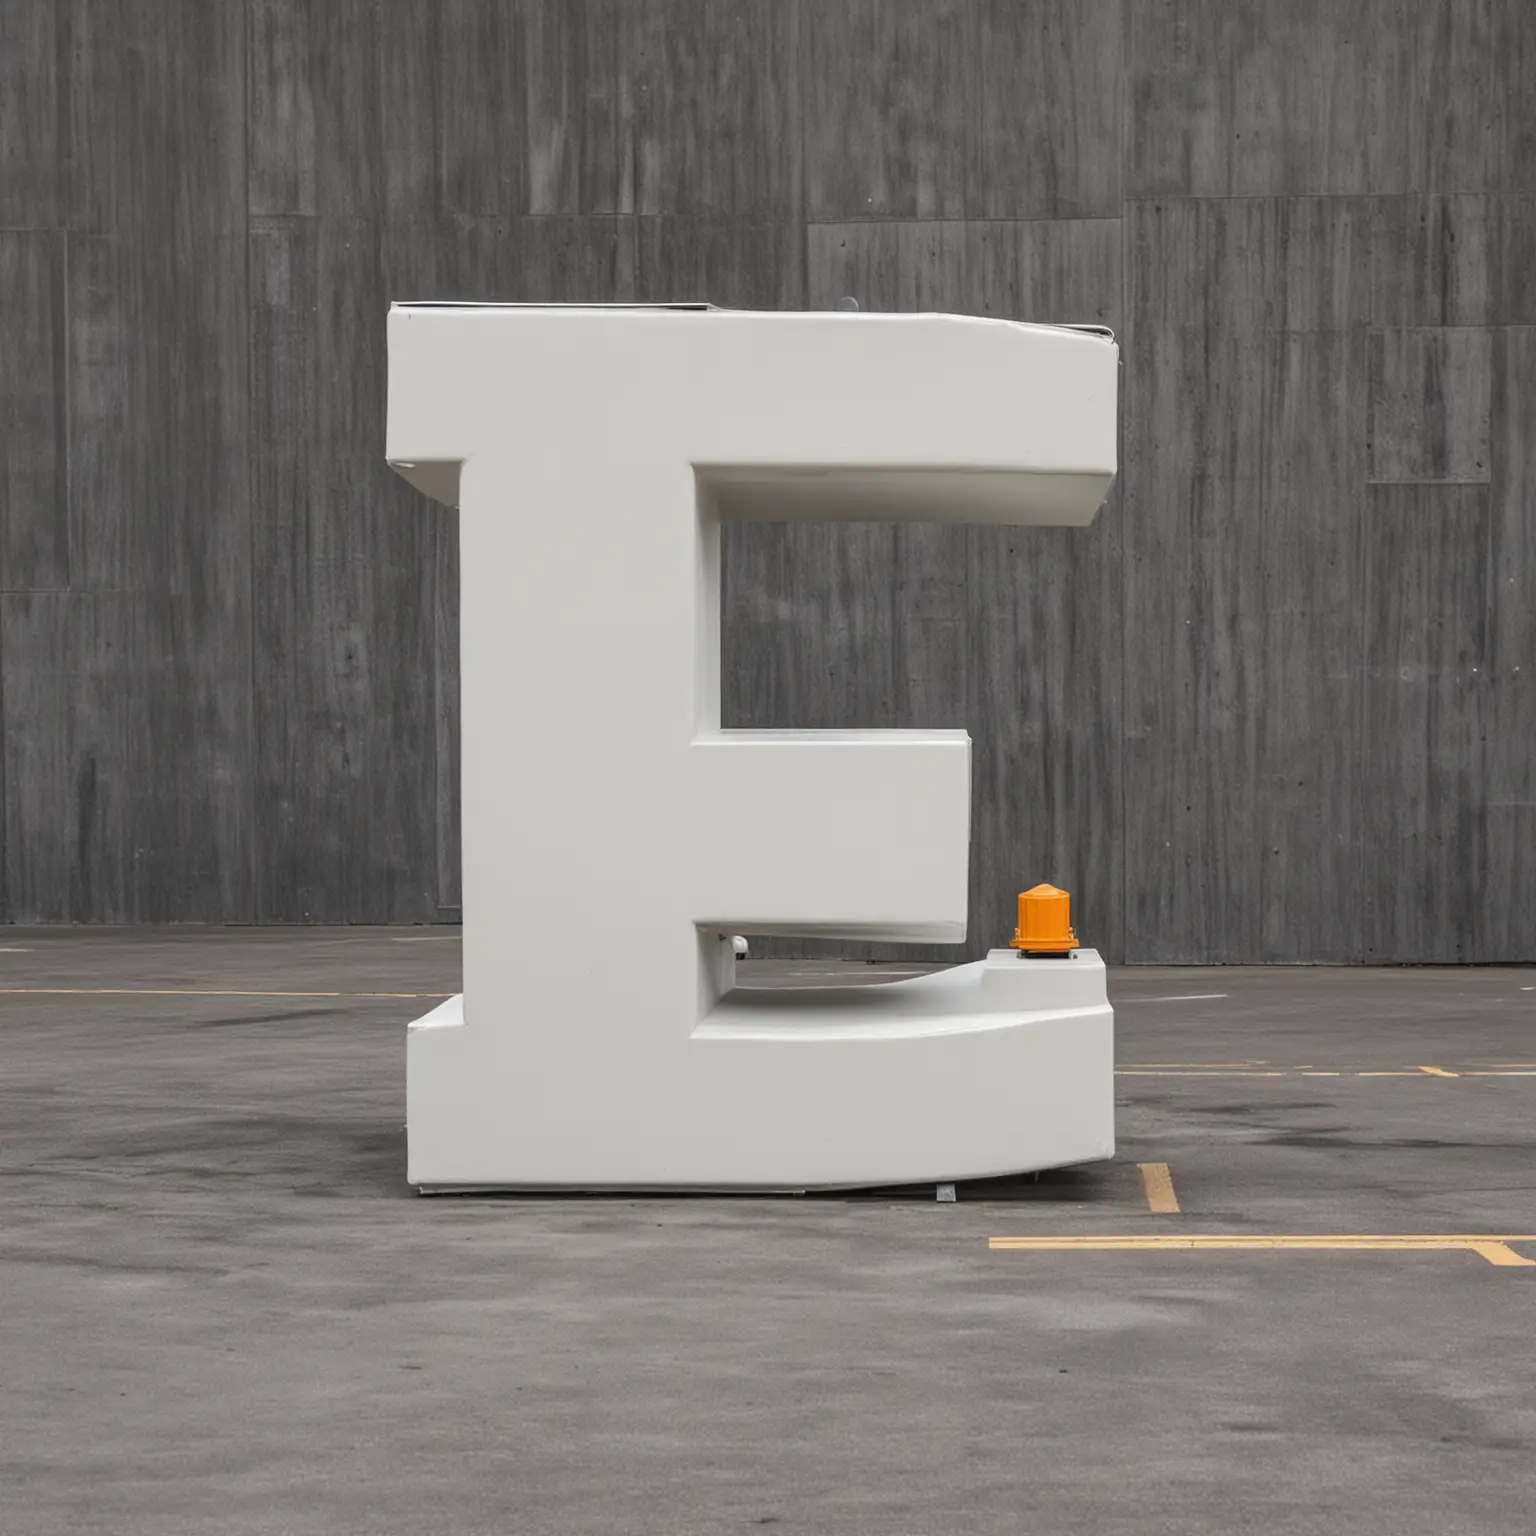 Industrial Giant Letter E Amidst Machinery